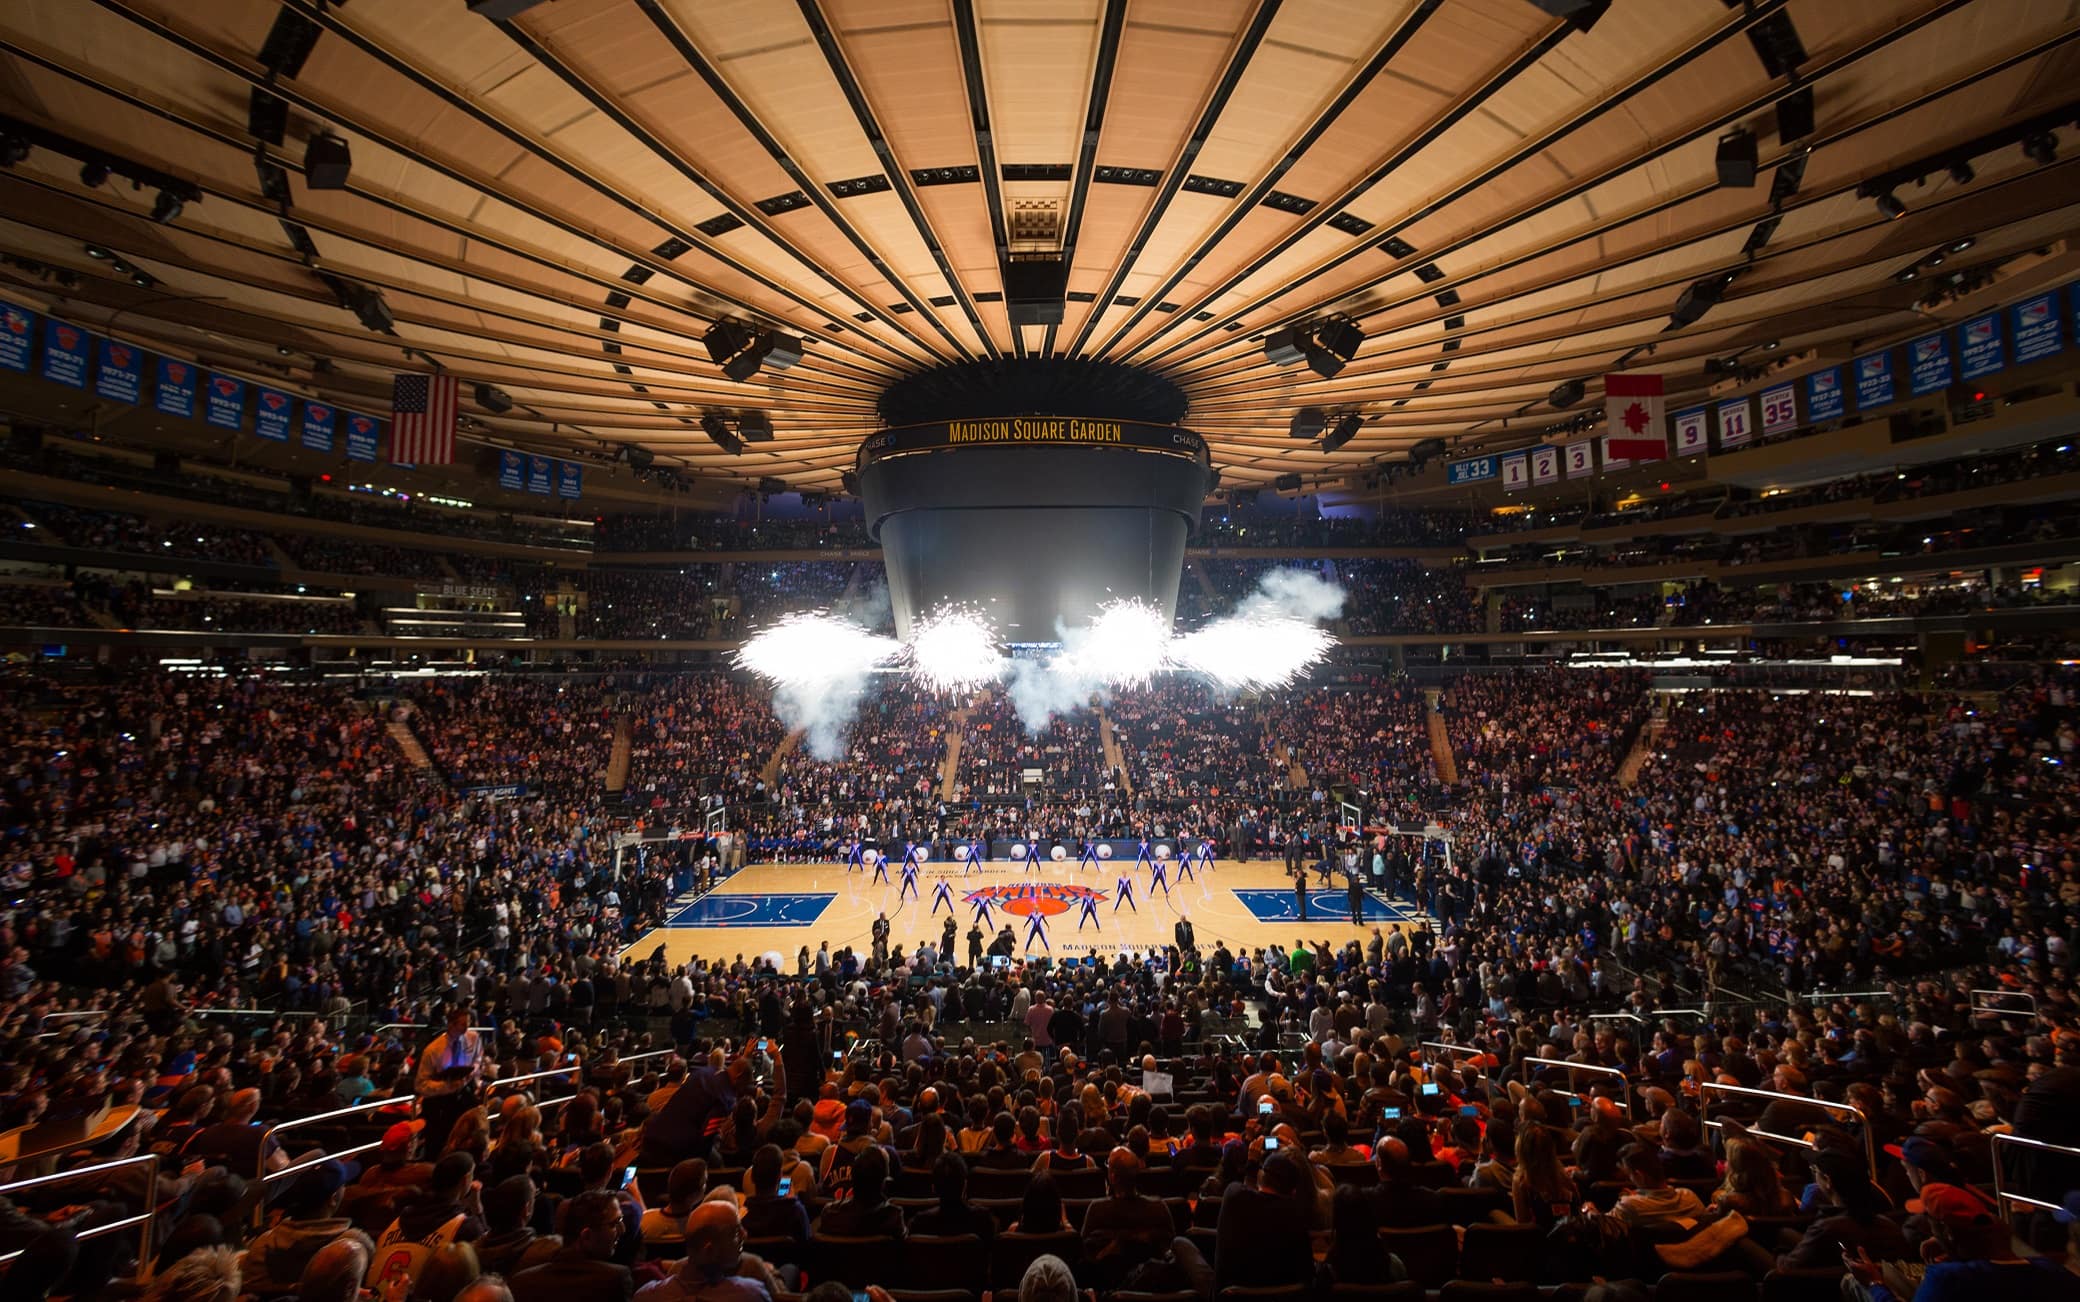 How to buy tickets for Madison Square Garden - Hellotickets